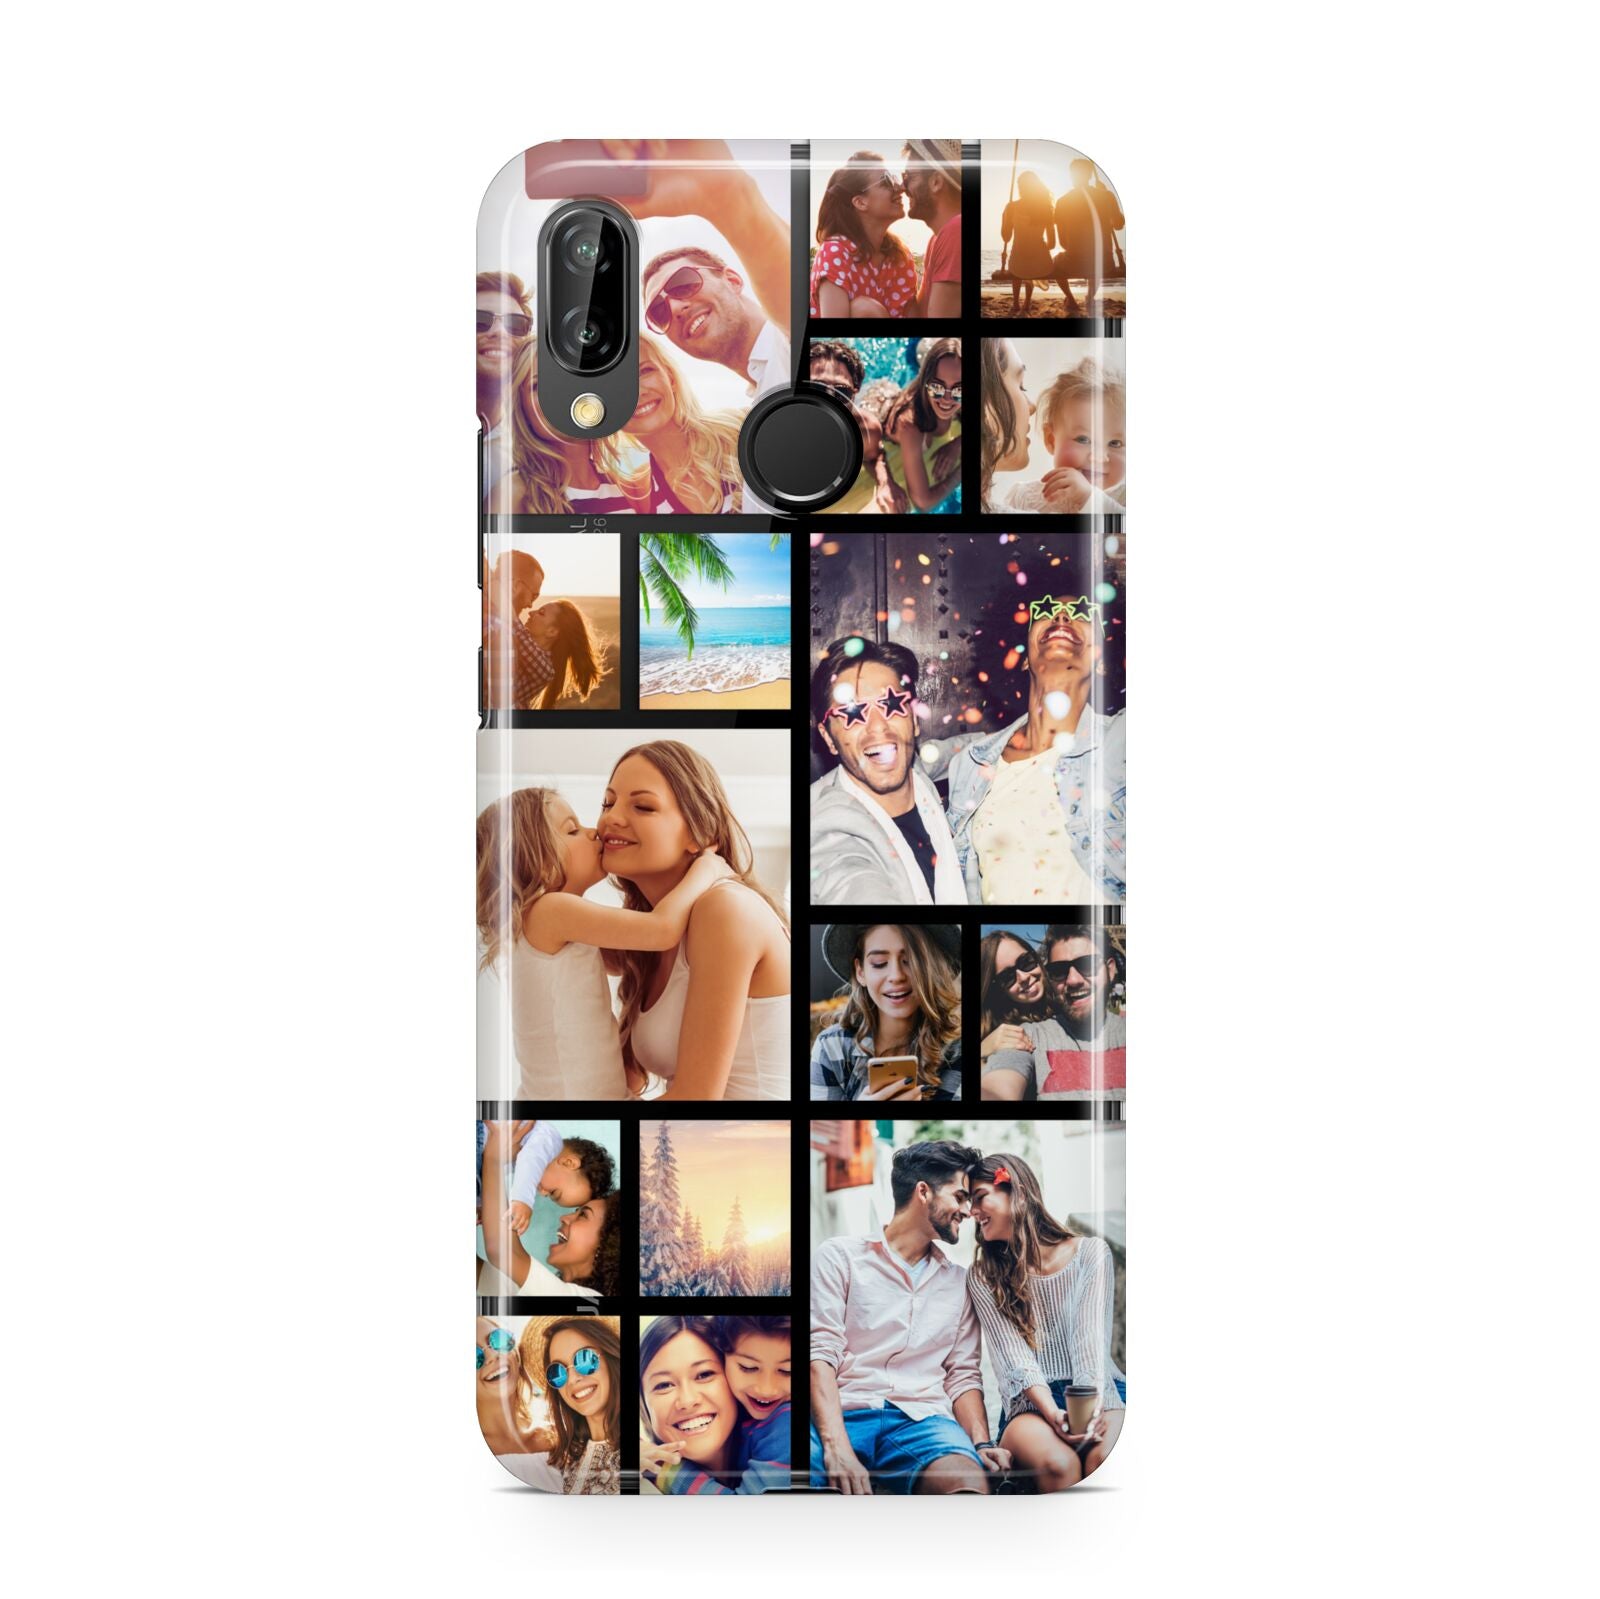 Abstract Multi Tile Photo Montage Upload Huawei P20 Lite Phone Case